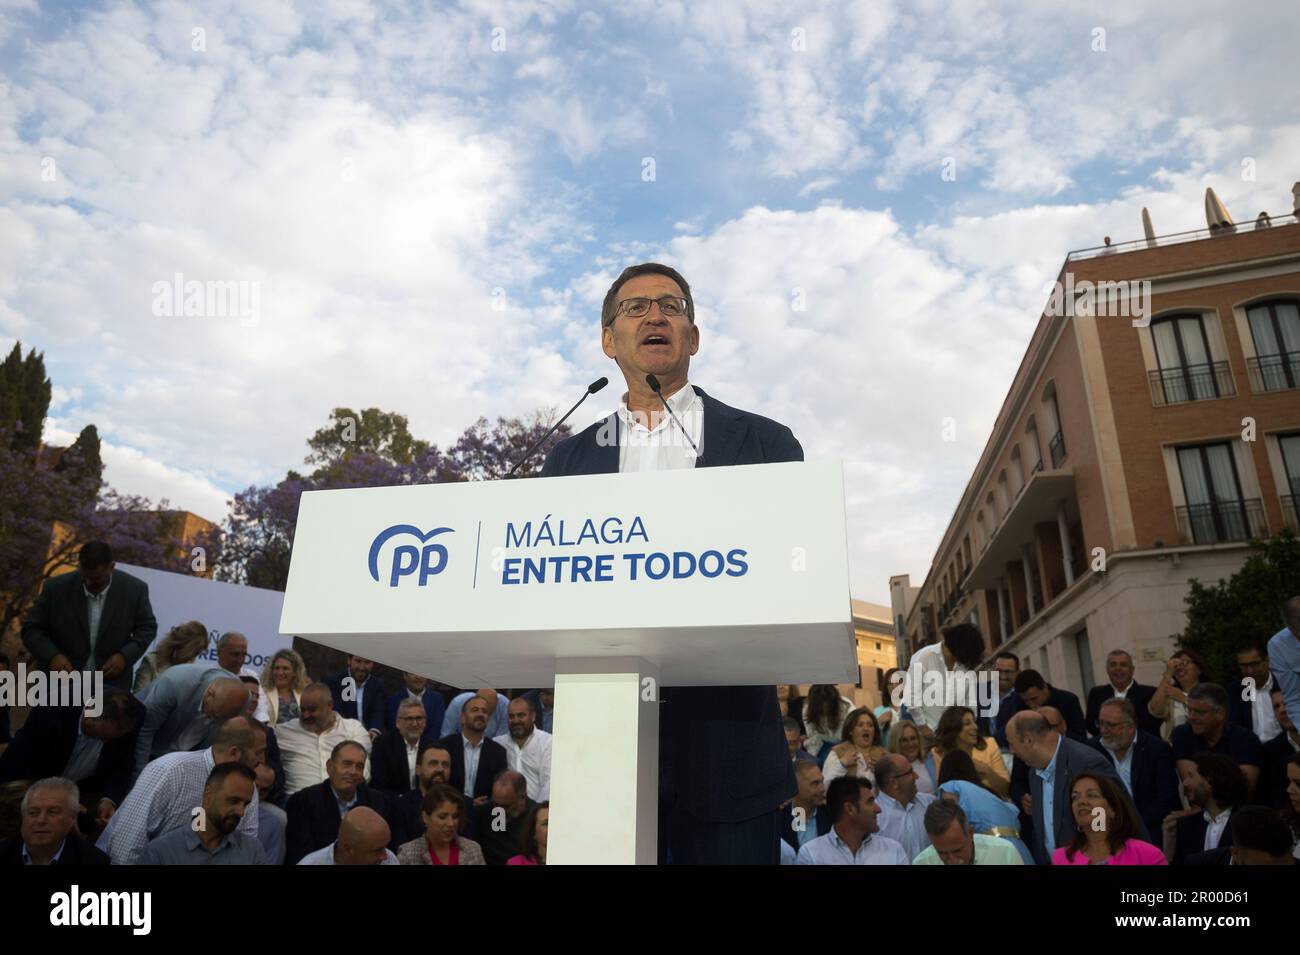 Malaga, Spain. 05th May, 2023. Spanish Popular Party leader Alberto Nunez Feijoo is seen delivering a speech as he takes part in an electoral pre-campaign event. The president of the Spanish Popular Party, Alberto Nunez Feijoo, has begun a tour of pre-election events in several cities across the country to support the Popular Party's candidates for the upcoming municipal elections. The results of the municipal elections on May 28th could influence the vote in the Spanish general elections at the end of the year. (Photo by Jesus Merida/SOPA Images/Sipa USA) Credit: Sipa USA/Alamy Live News Stock Photo